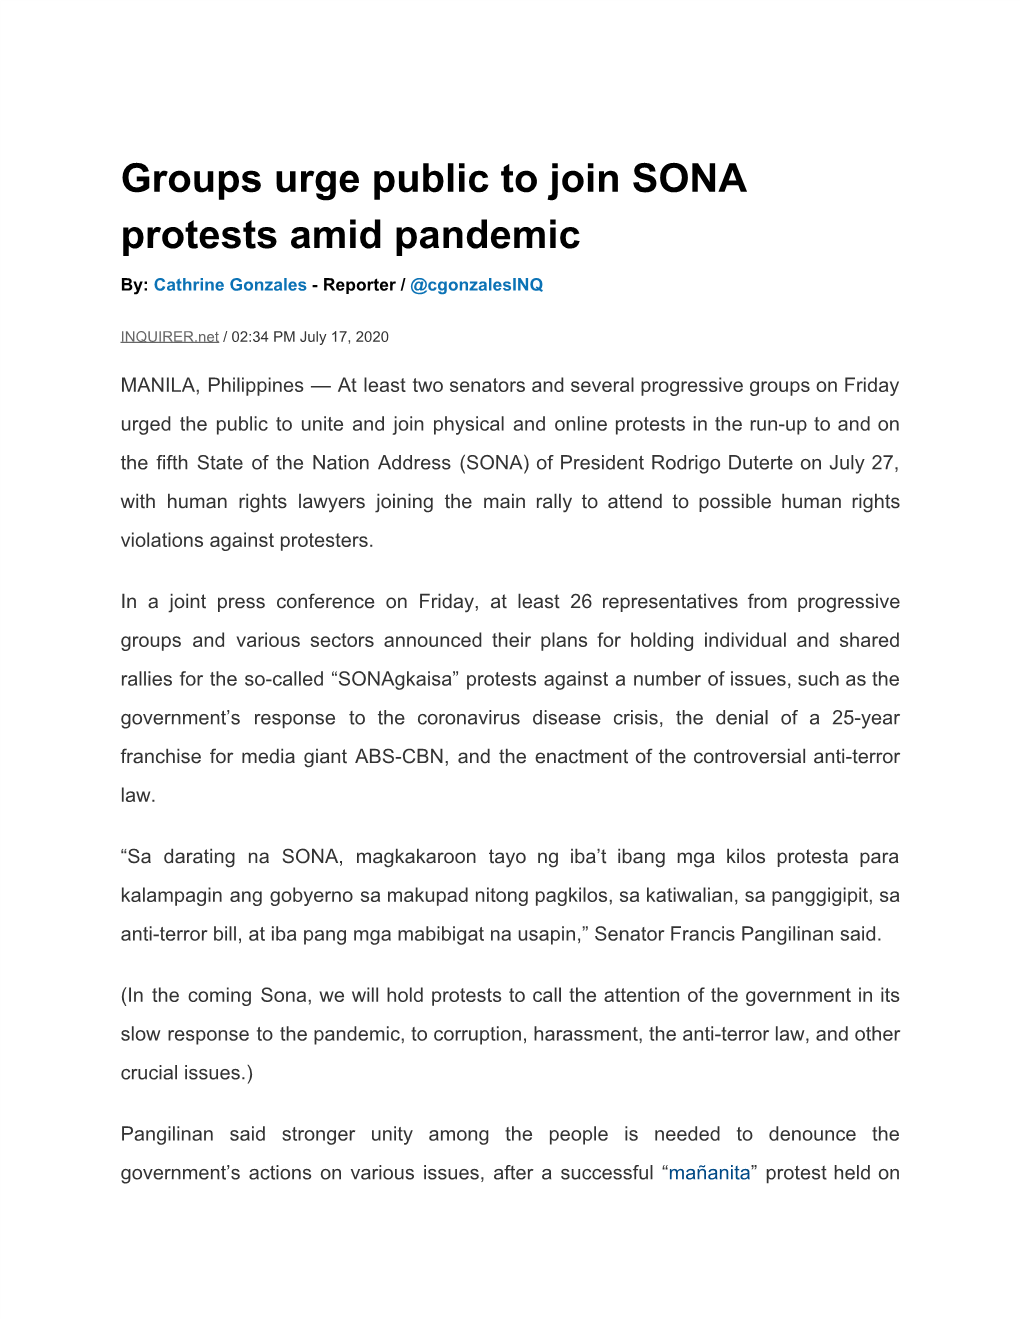 Groups Urge Public to Join SONA Protests Amid Pandemic